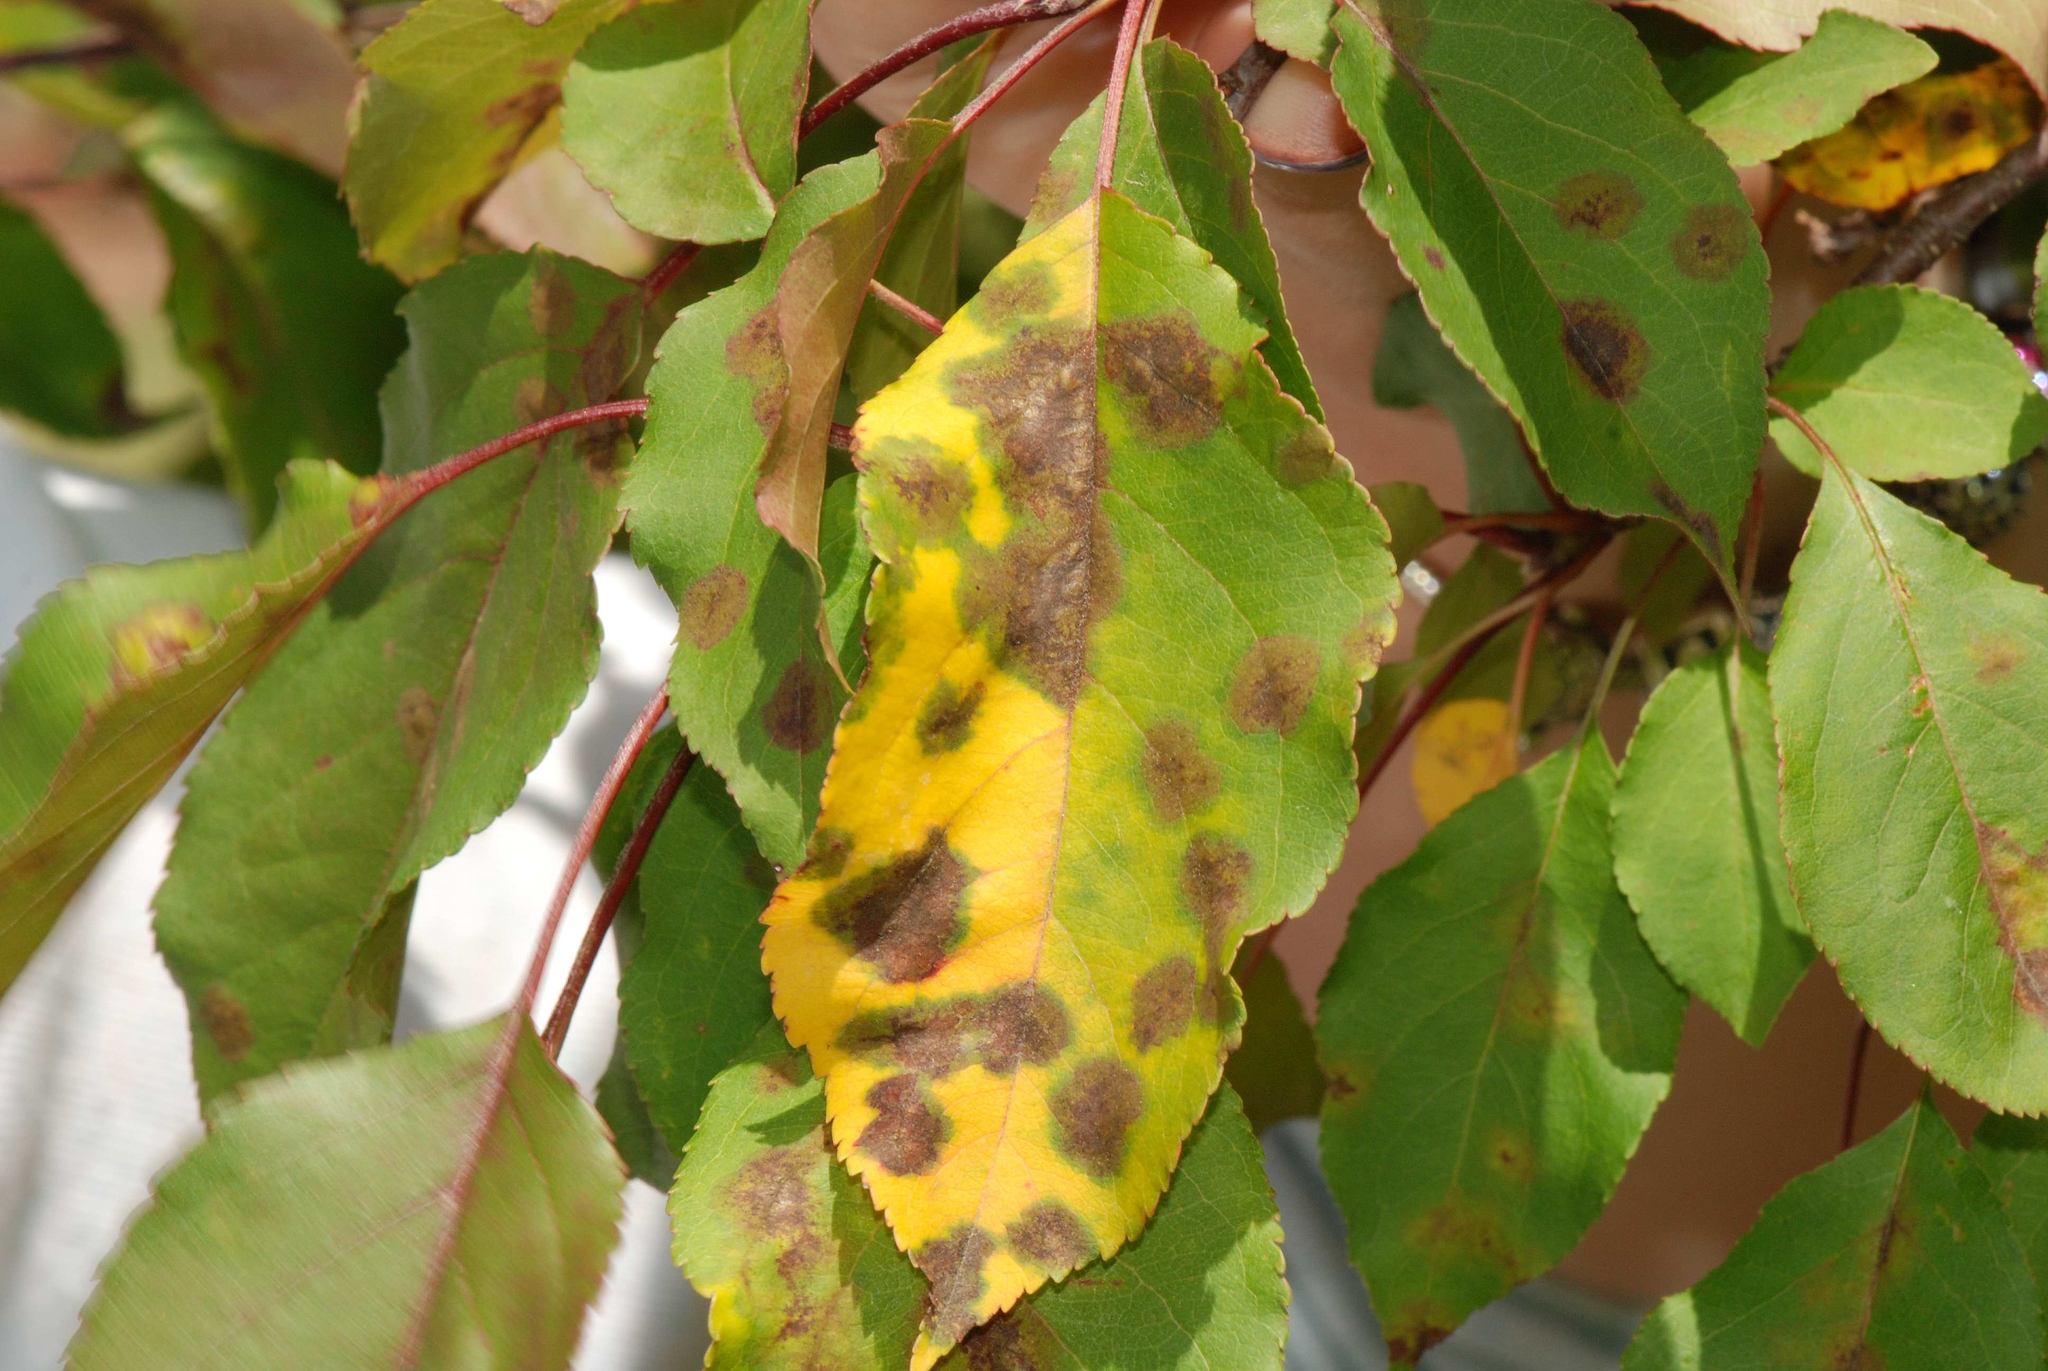 Be on the Lookout for Apple Scab, Mildew and Spruce Needle Cast